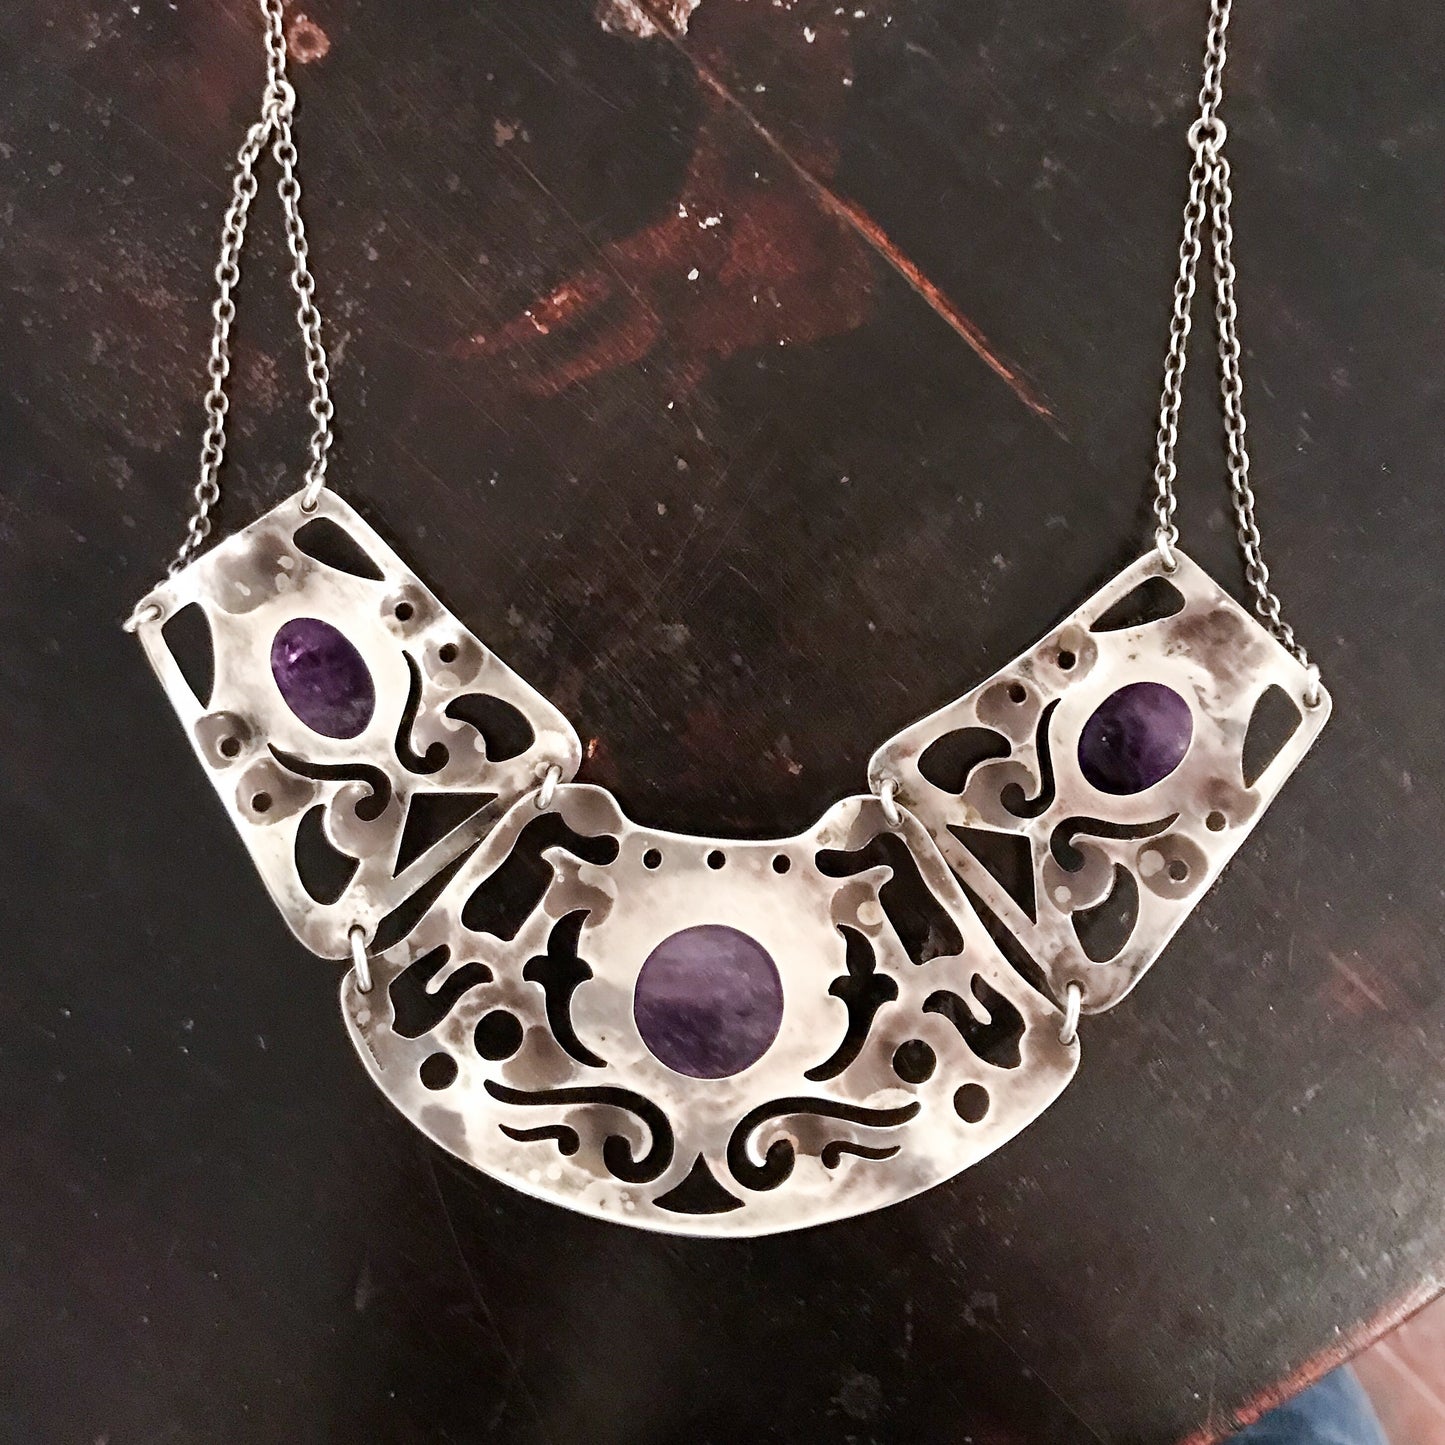 Big Arts and Crafts Amethyst Necklace Sterling c. 1940